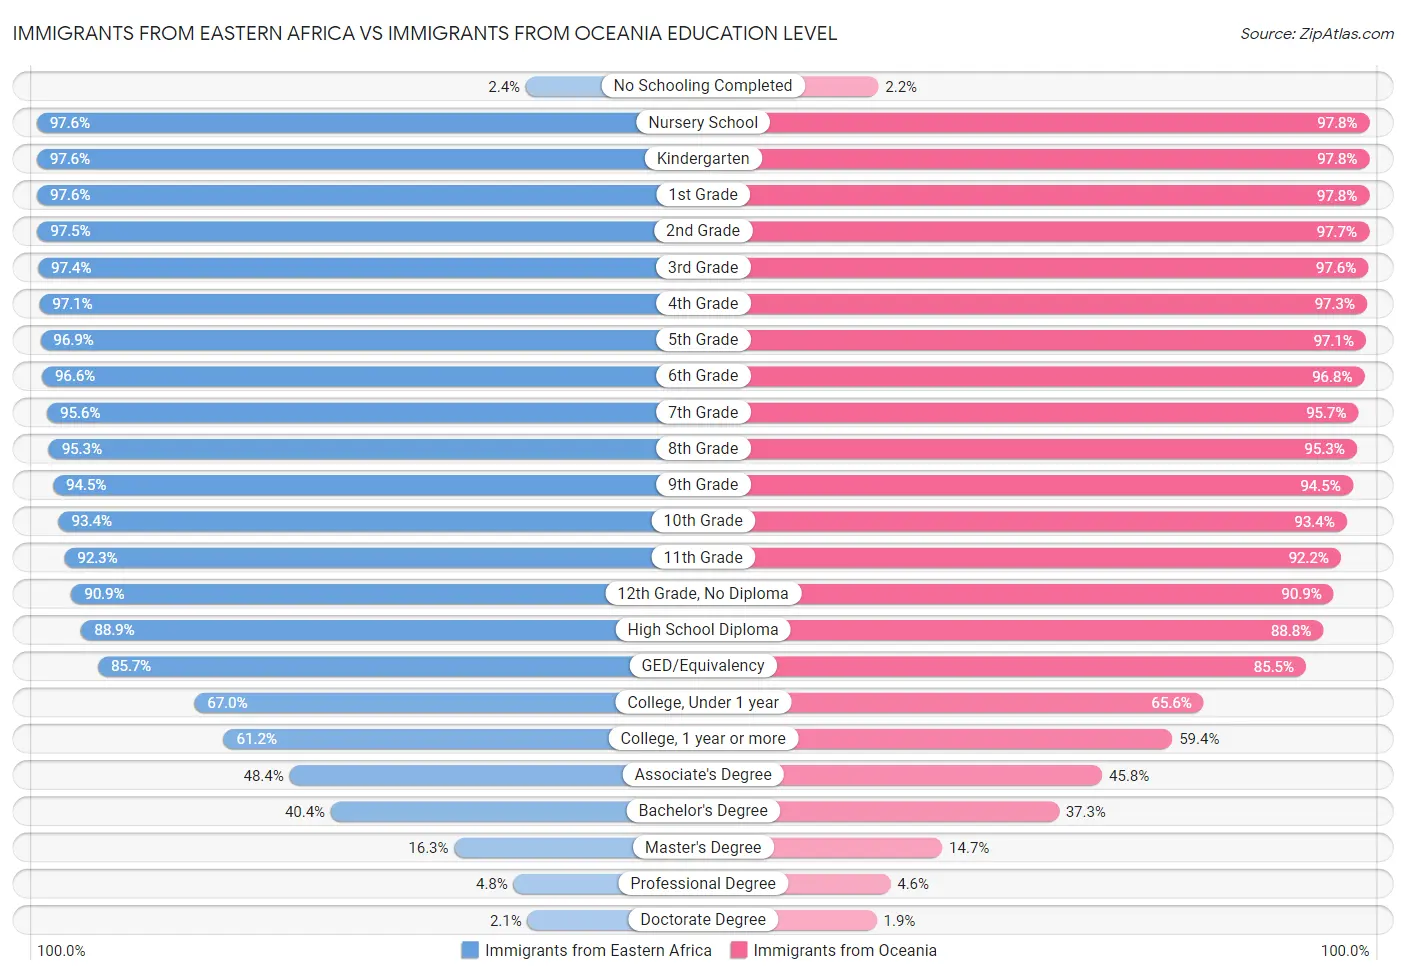 Immigrants from Eastern Africa vs Immigrants from Oceania Education Level